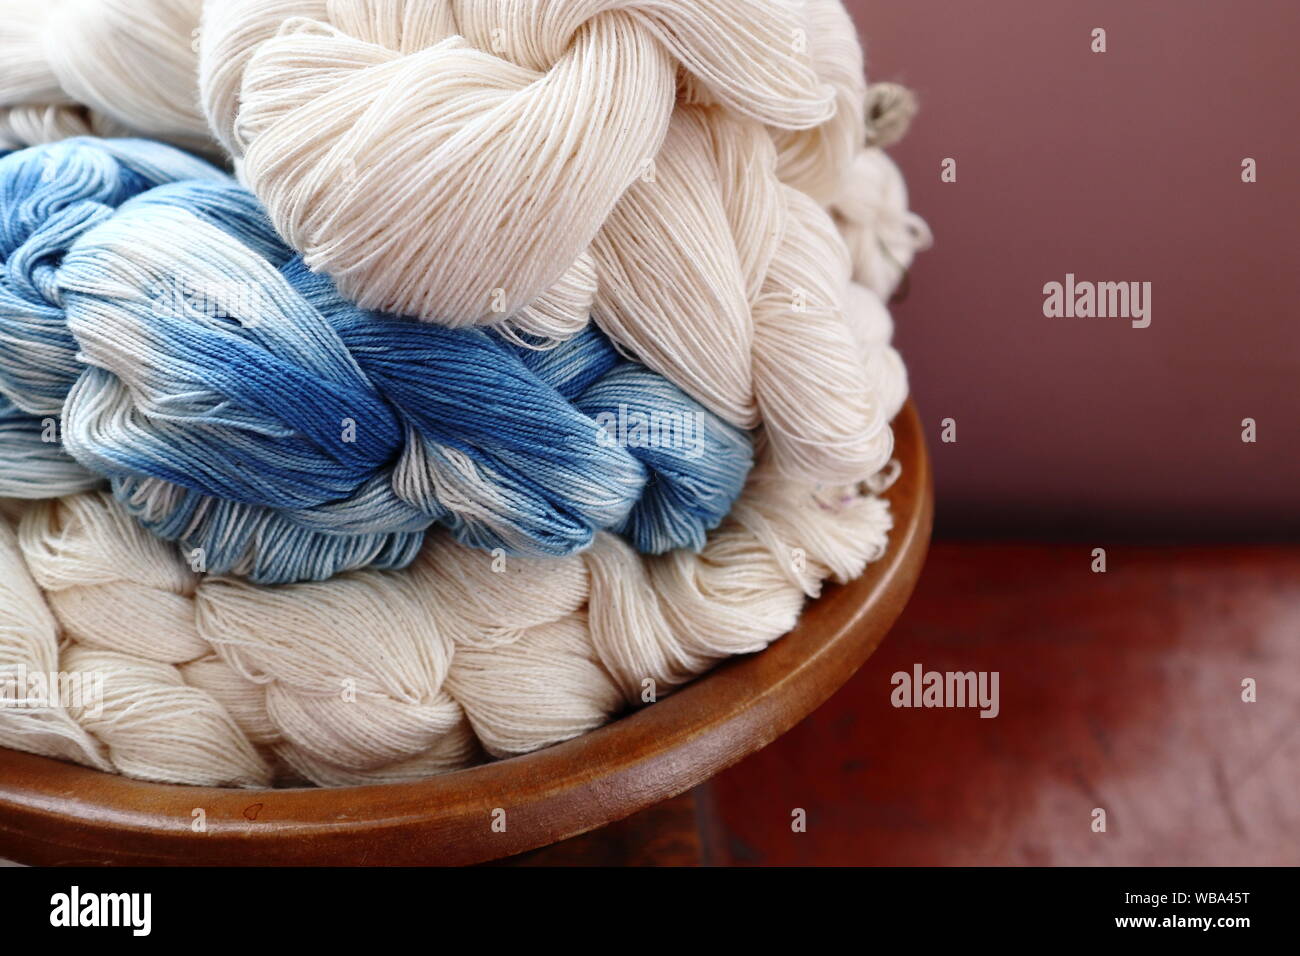 cotton warp chains in natural undyed and indigo hand dyed yarn Stock Photo